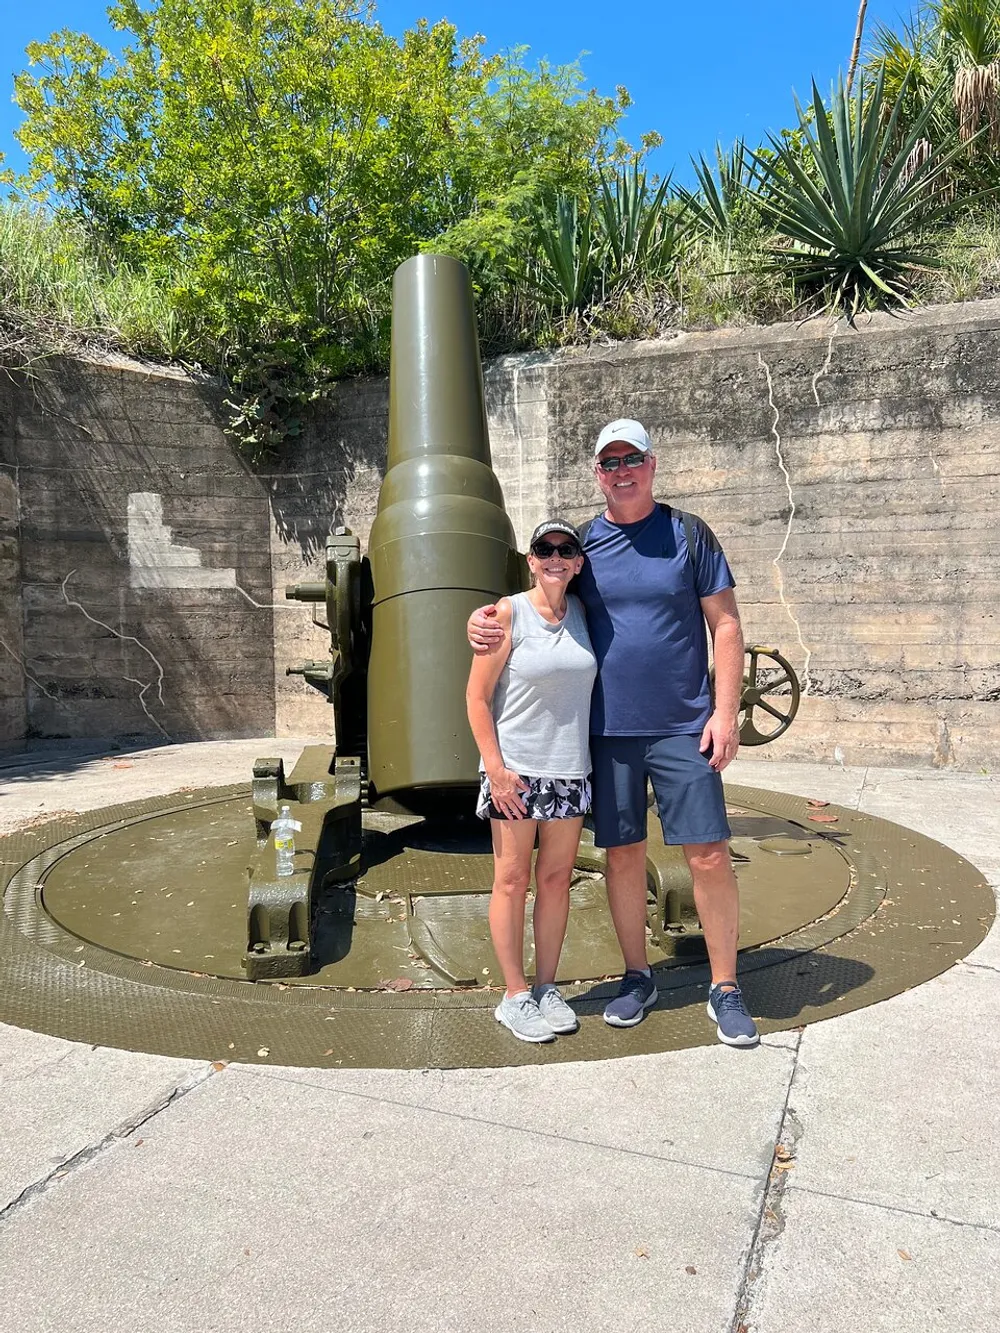 Two people are smiling for a photo in front of a large historic cannon on a sunny day